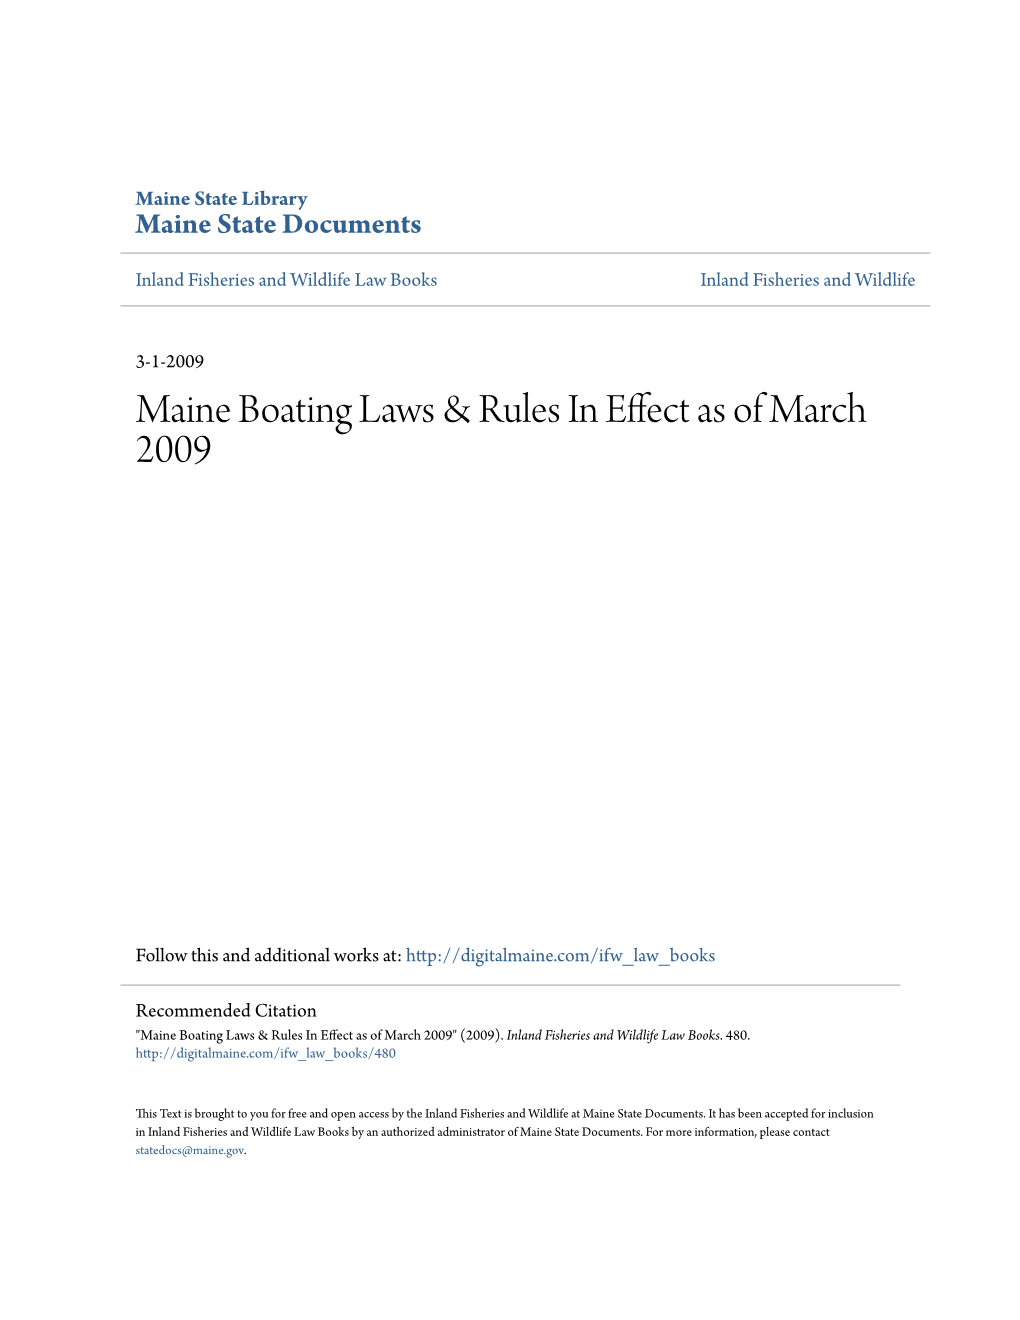 Maine Boating Laws & Rules in Effect As of March 2009